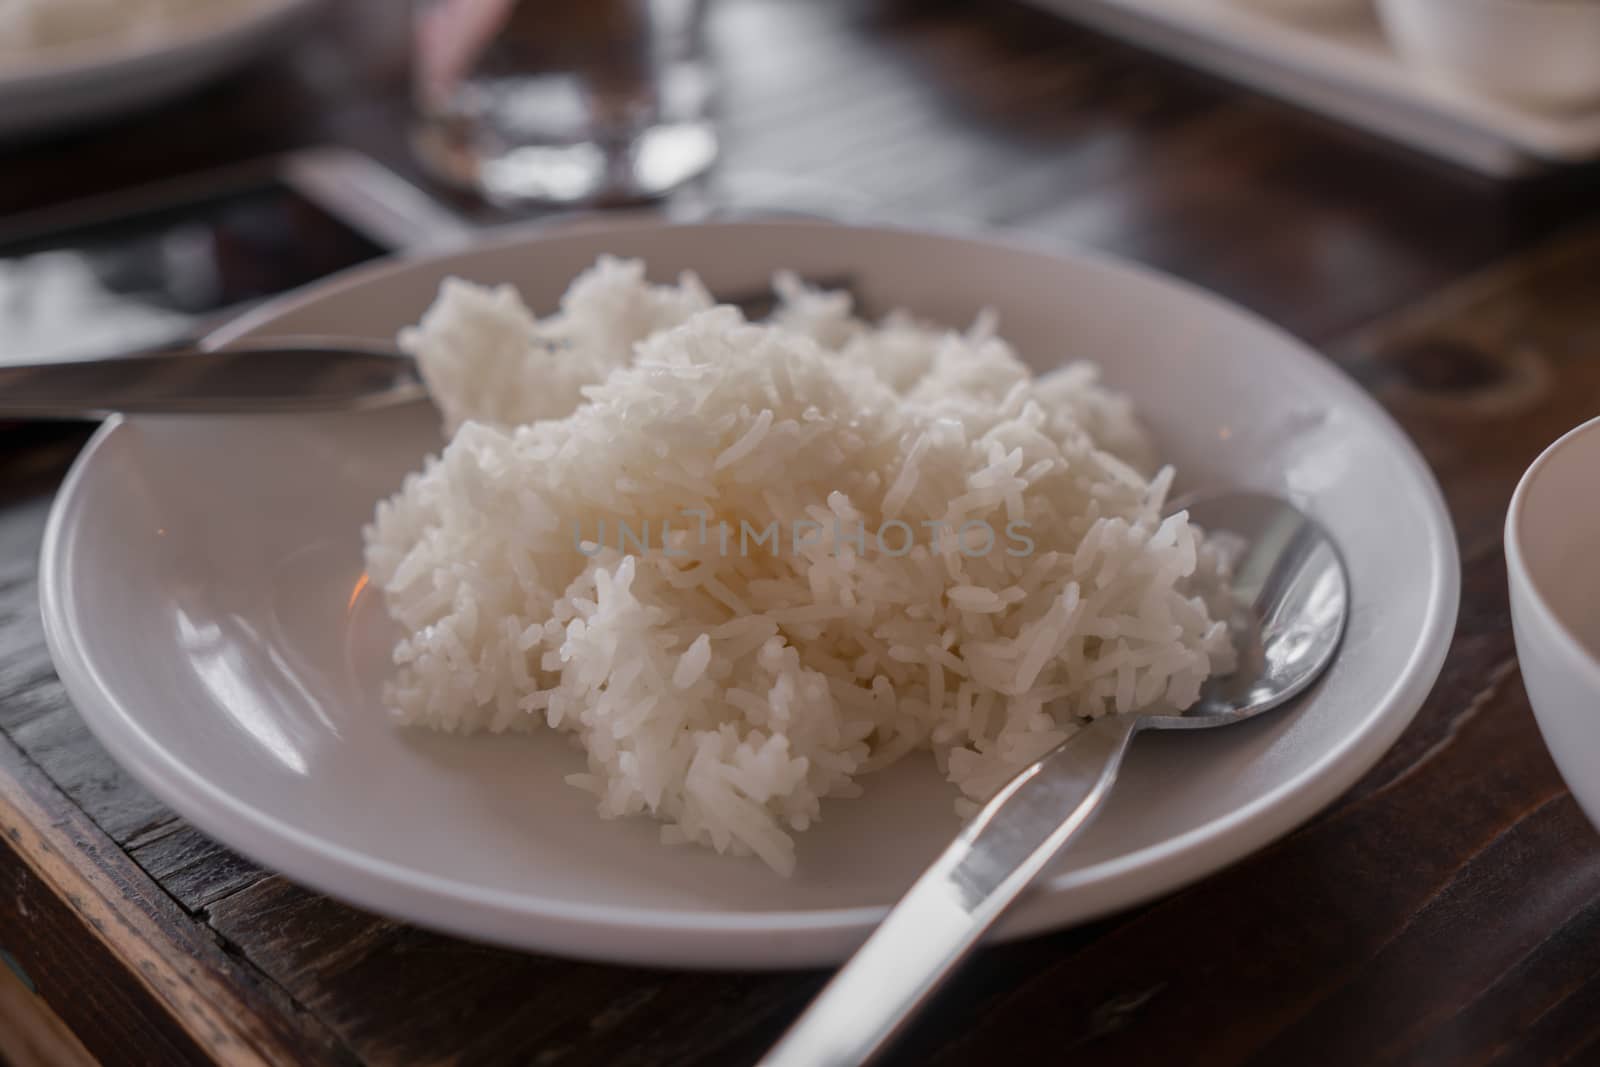 Rice in plates and utensils, ready to eat